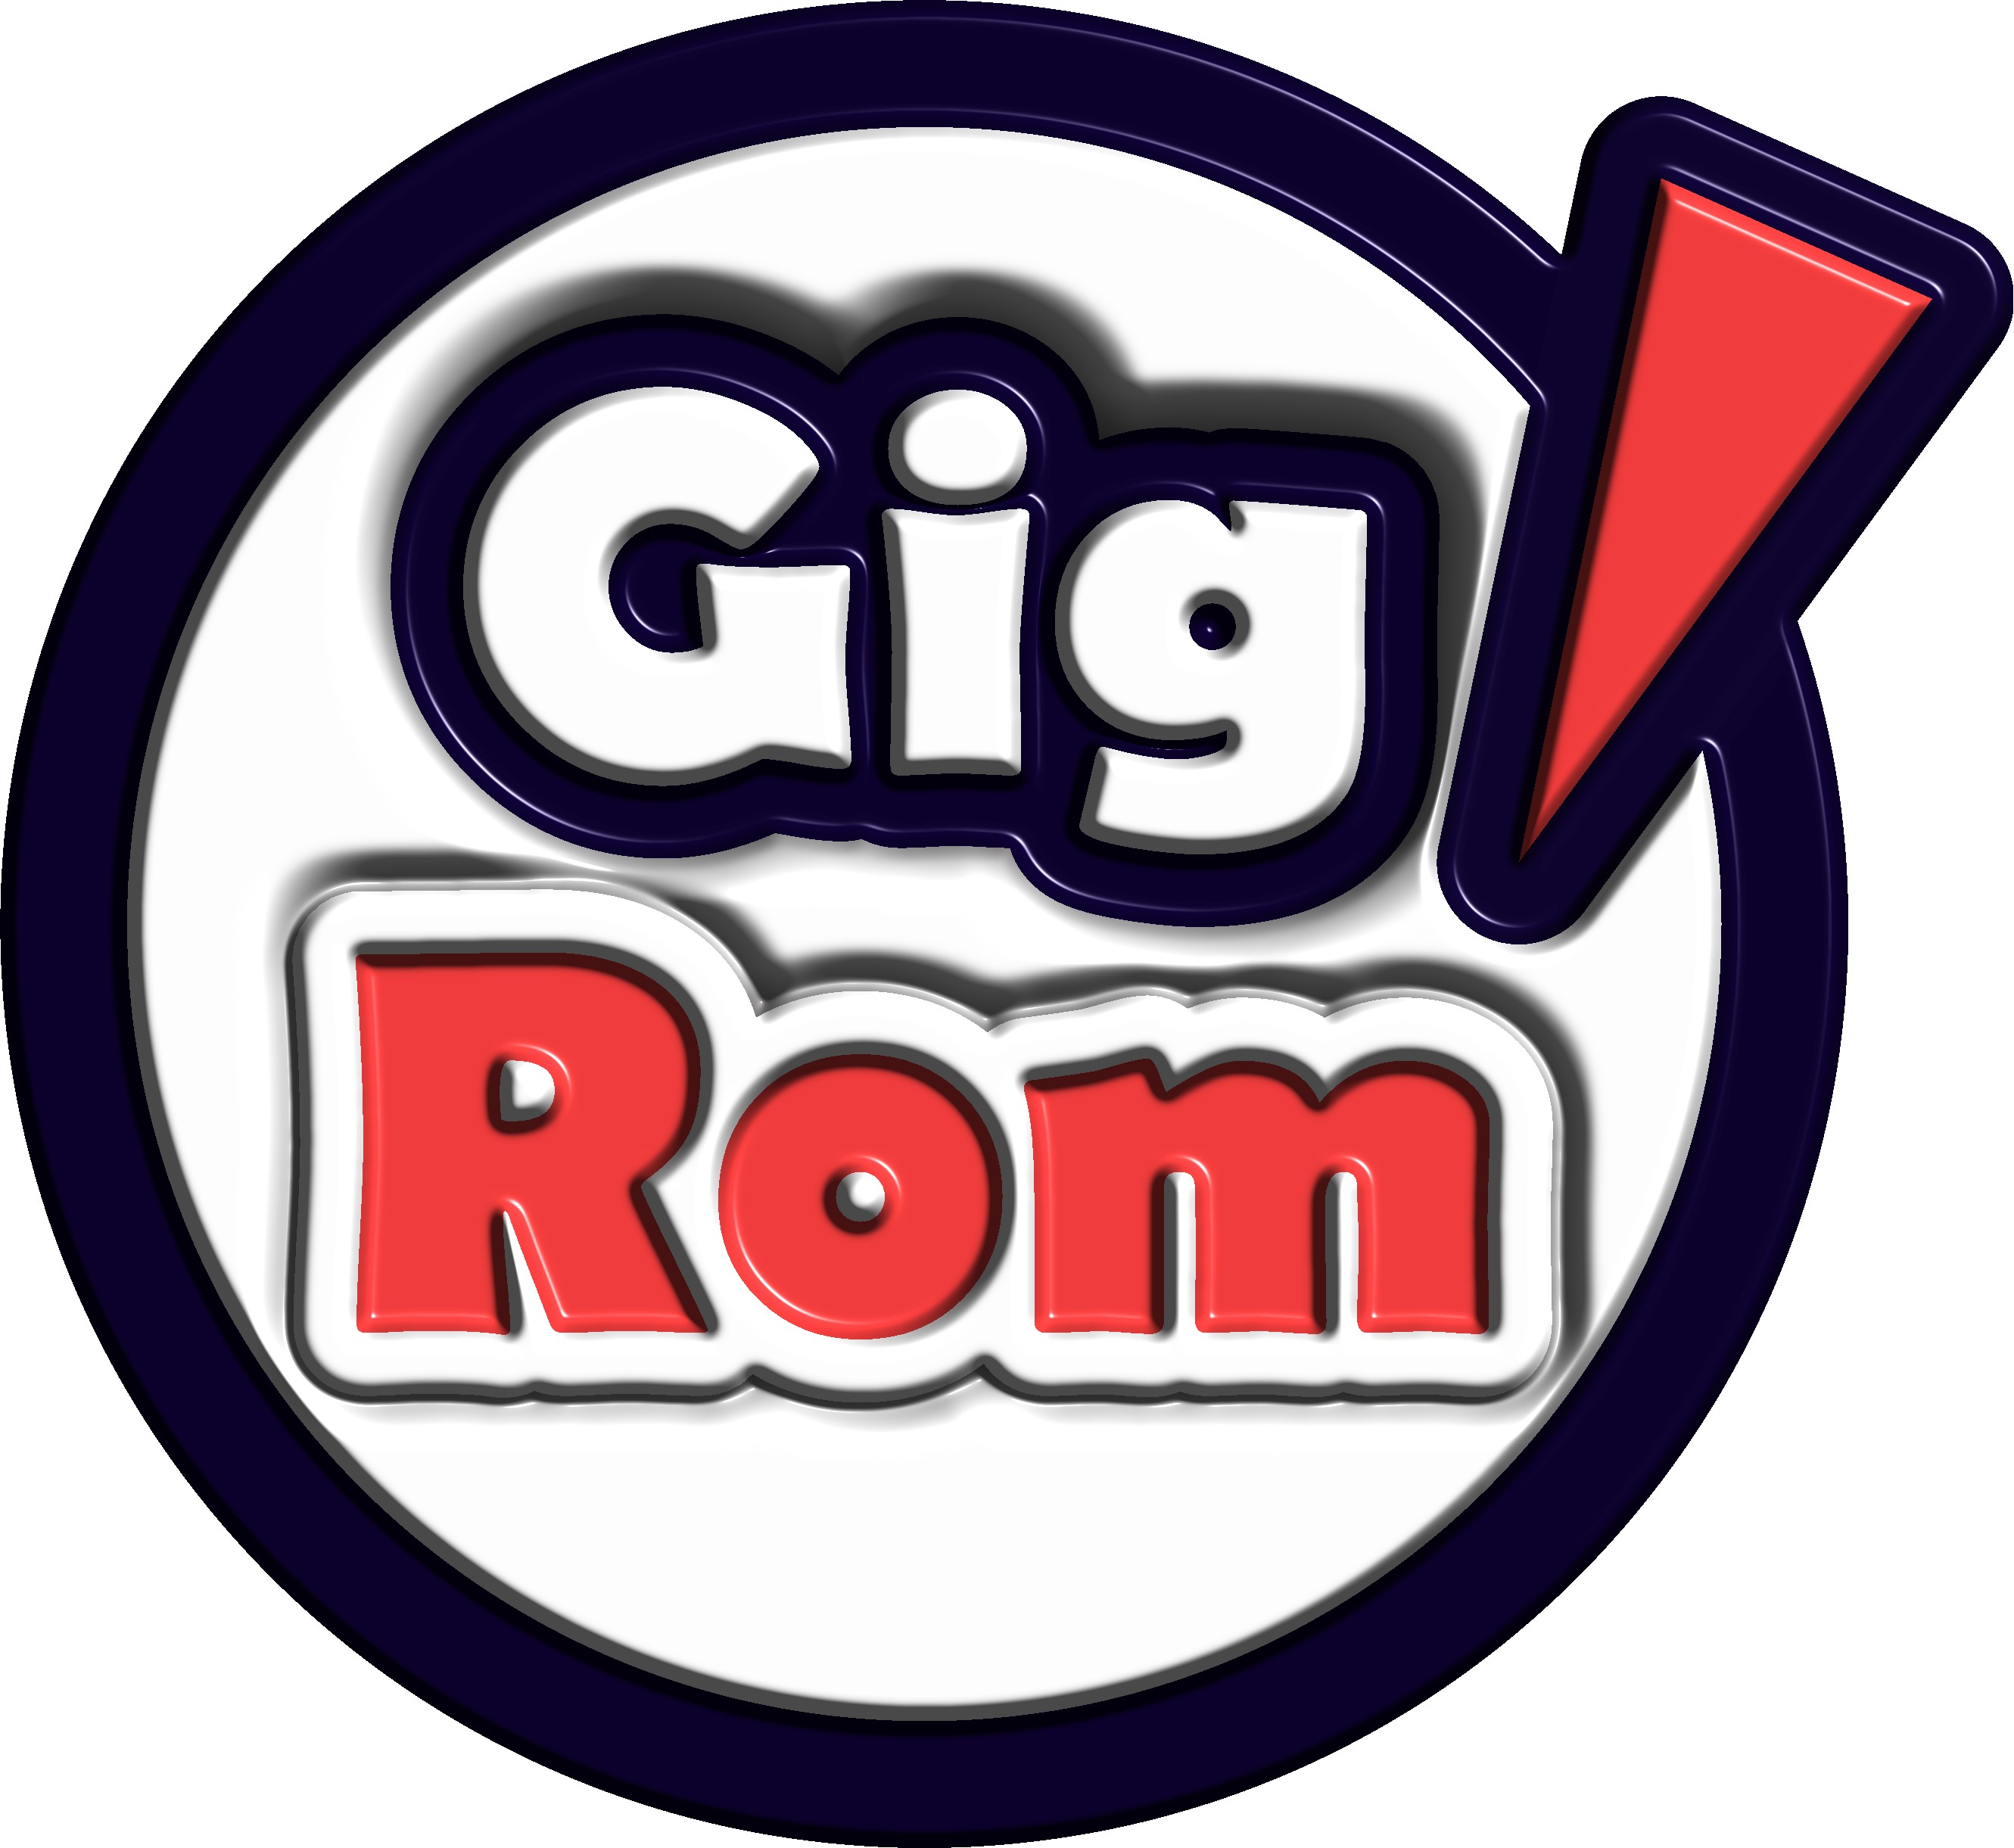 GigRom Official